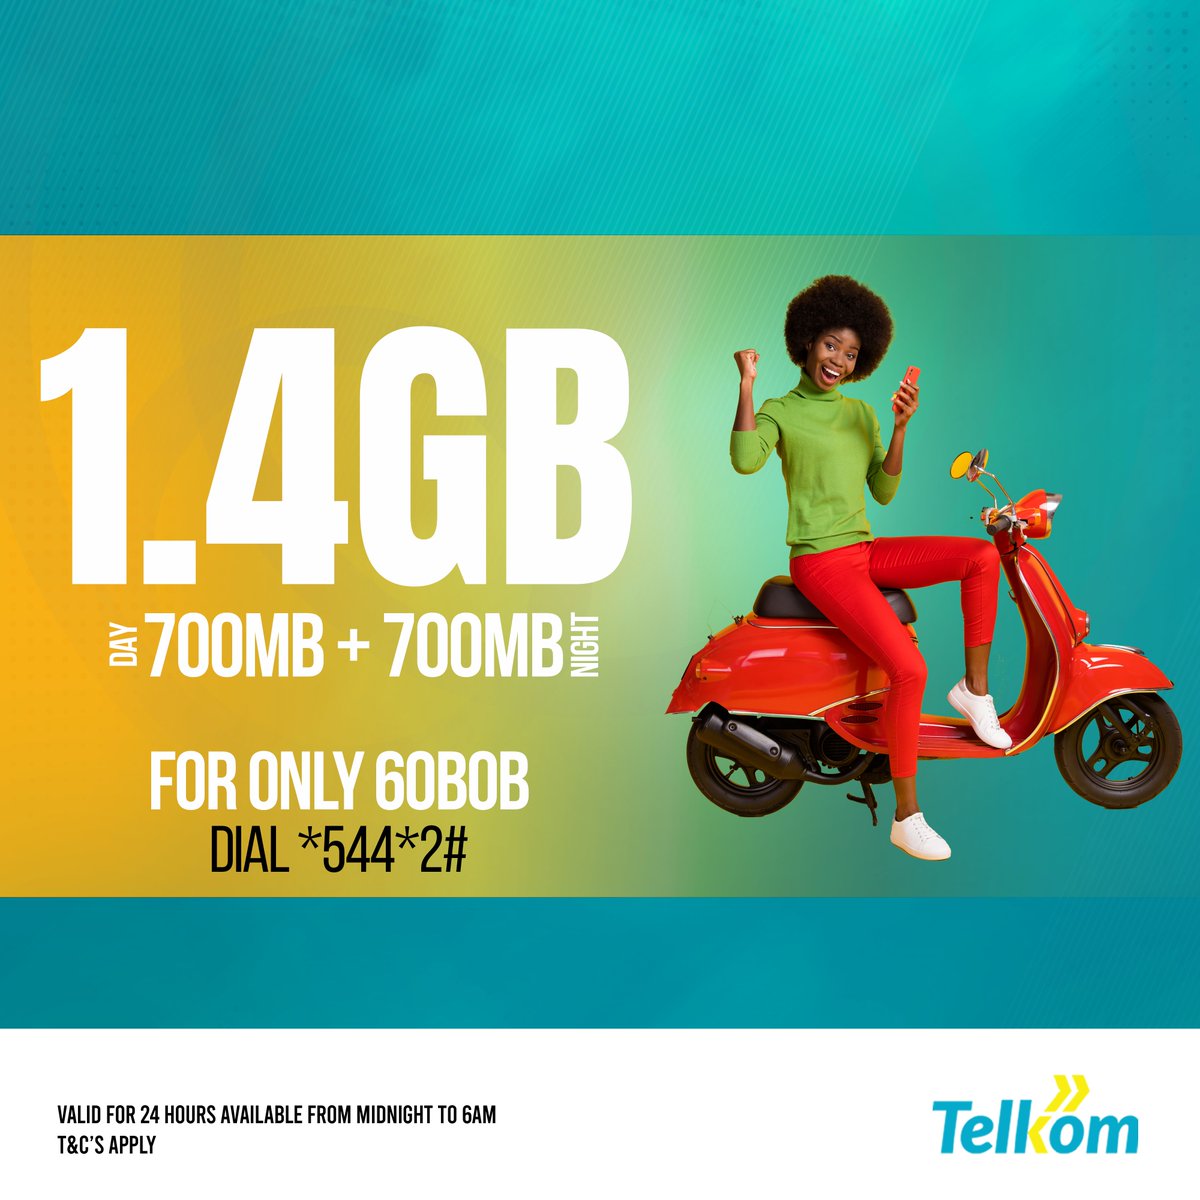 Double the data, double the thrill! 🎉 Get 700MB day + 700MB night, plus FREE WhatsApp and 60 minutes for just 60 bob! Watch videos, stay connected on chat, and conquer the day and night with #DailyBundles. Don't wait, dial *544*2# to kickstart your day!